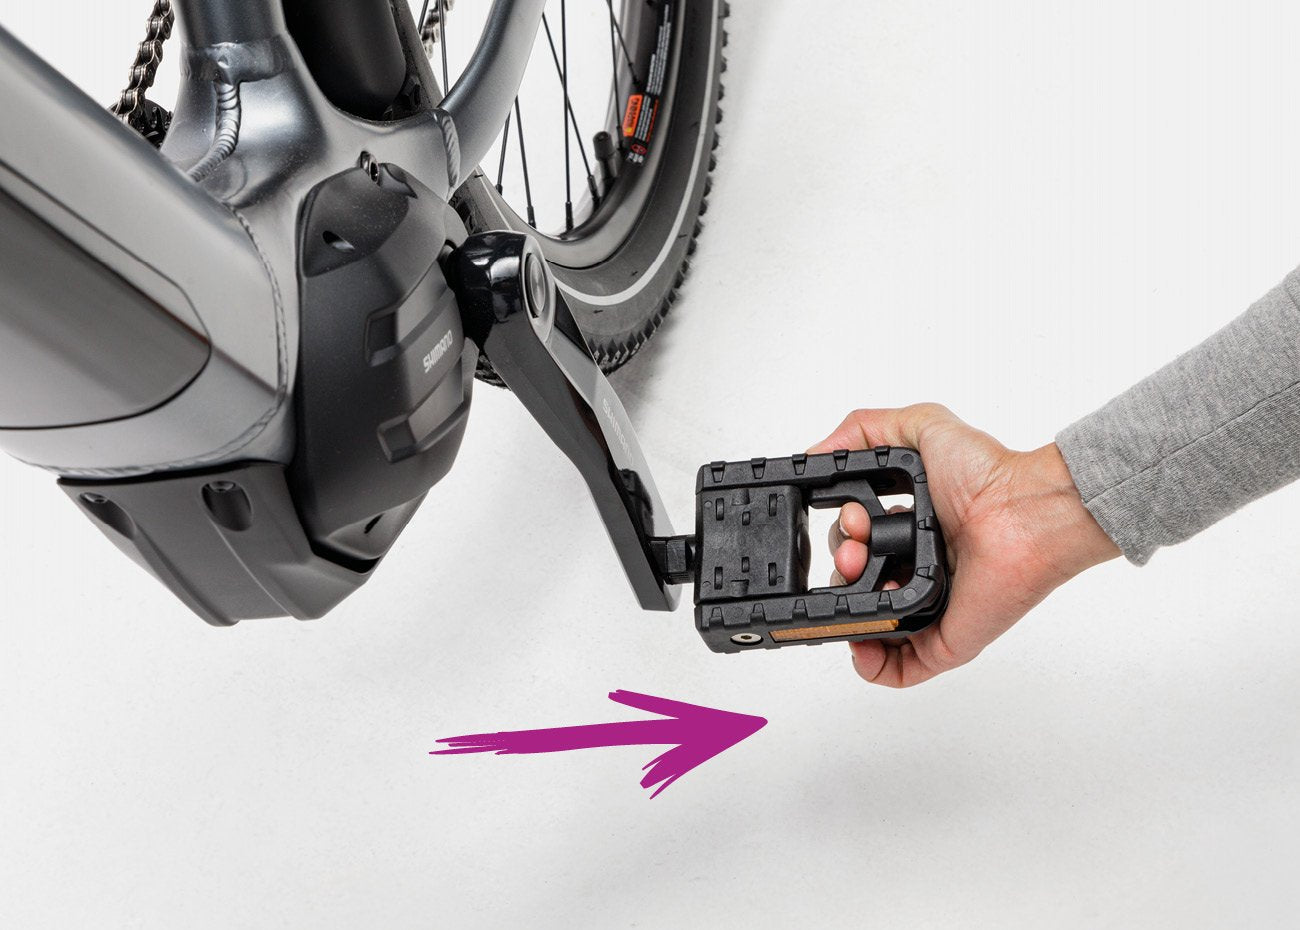 Pull lever to flip pedal closed on electric off-road bike